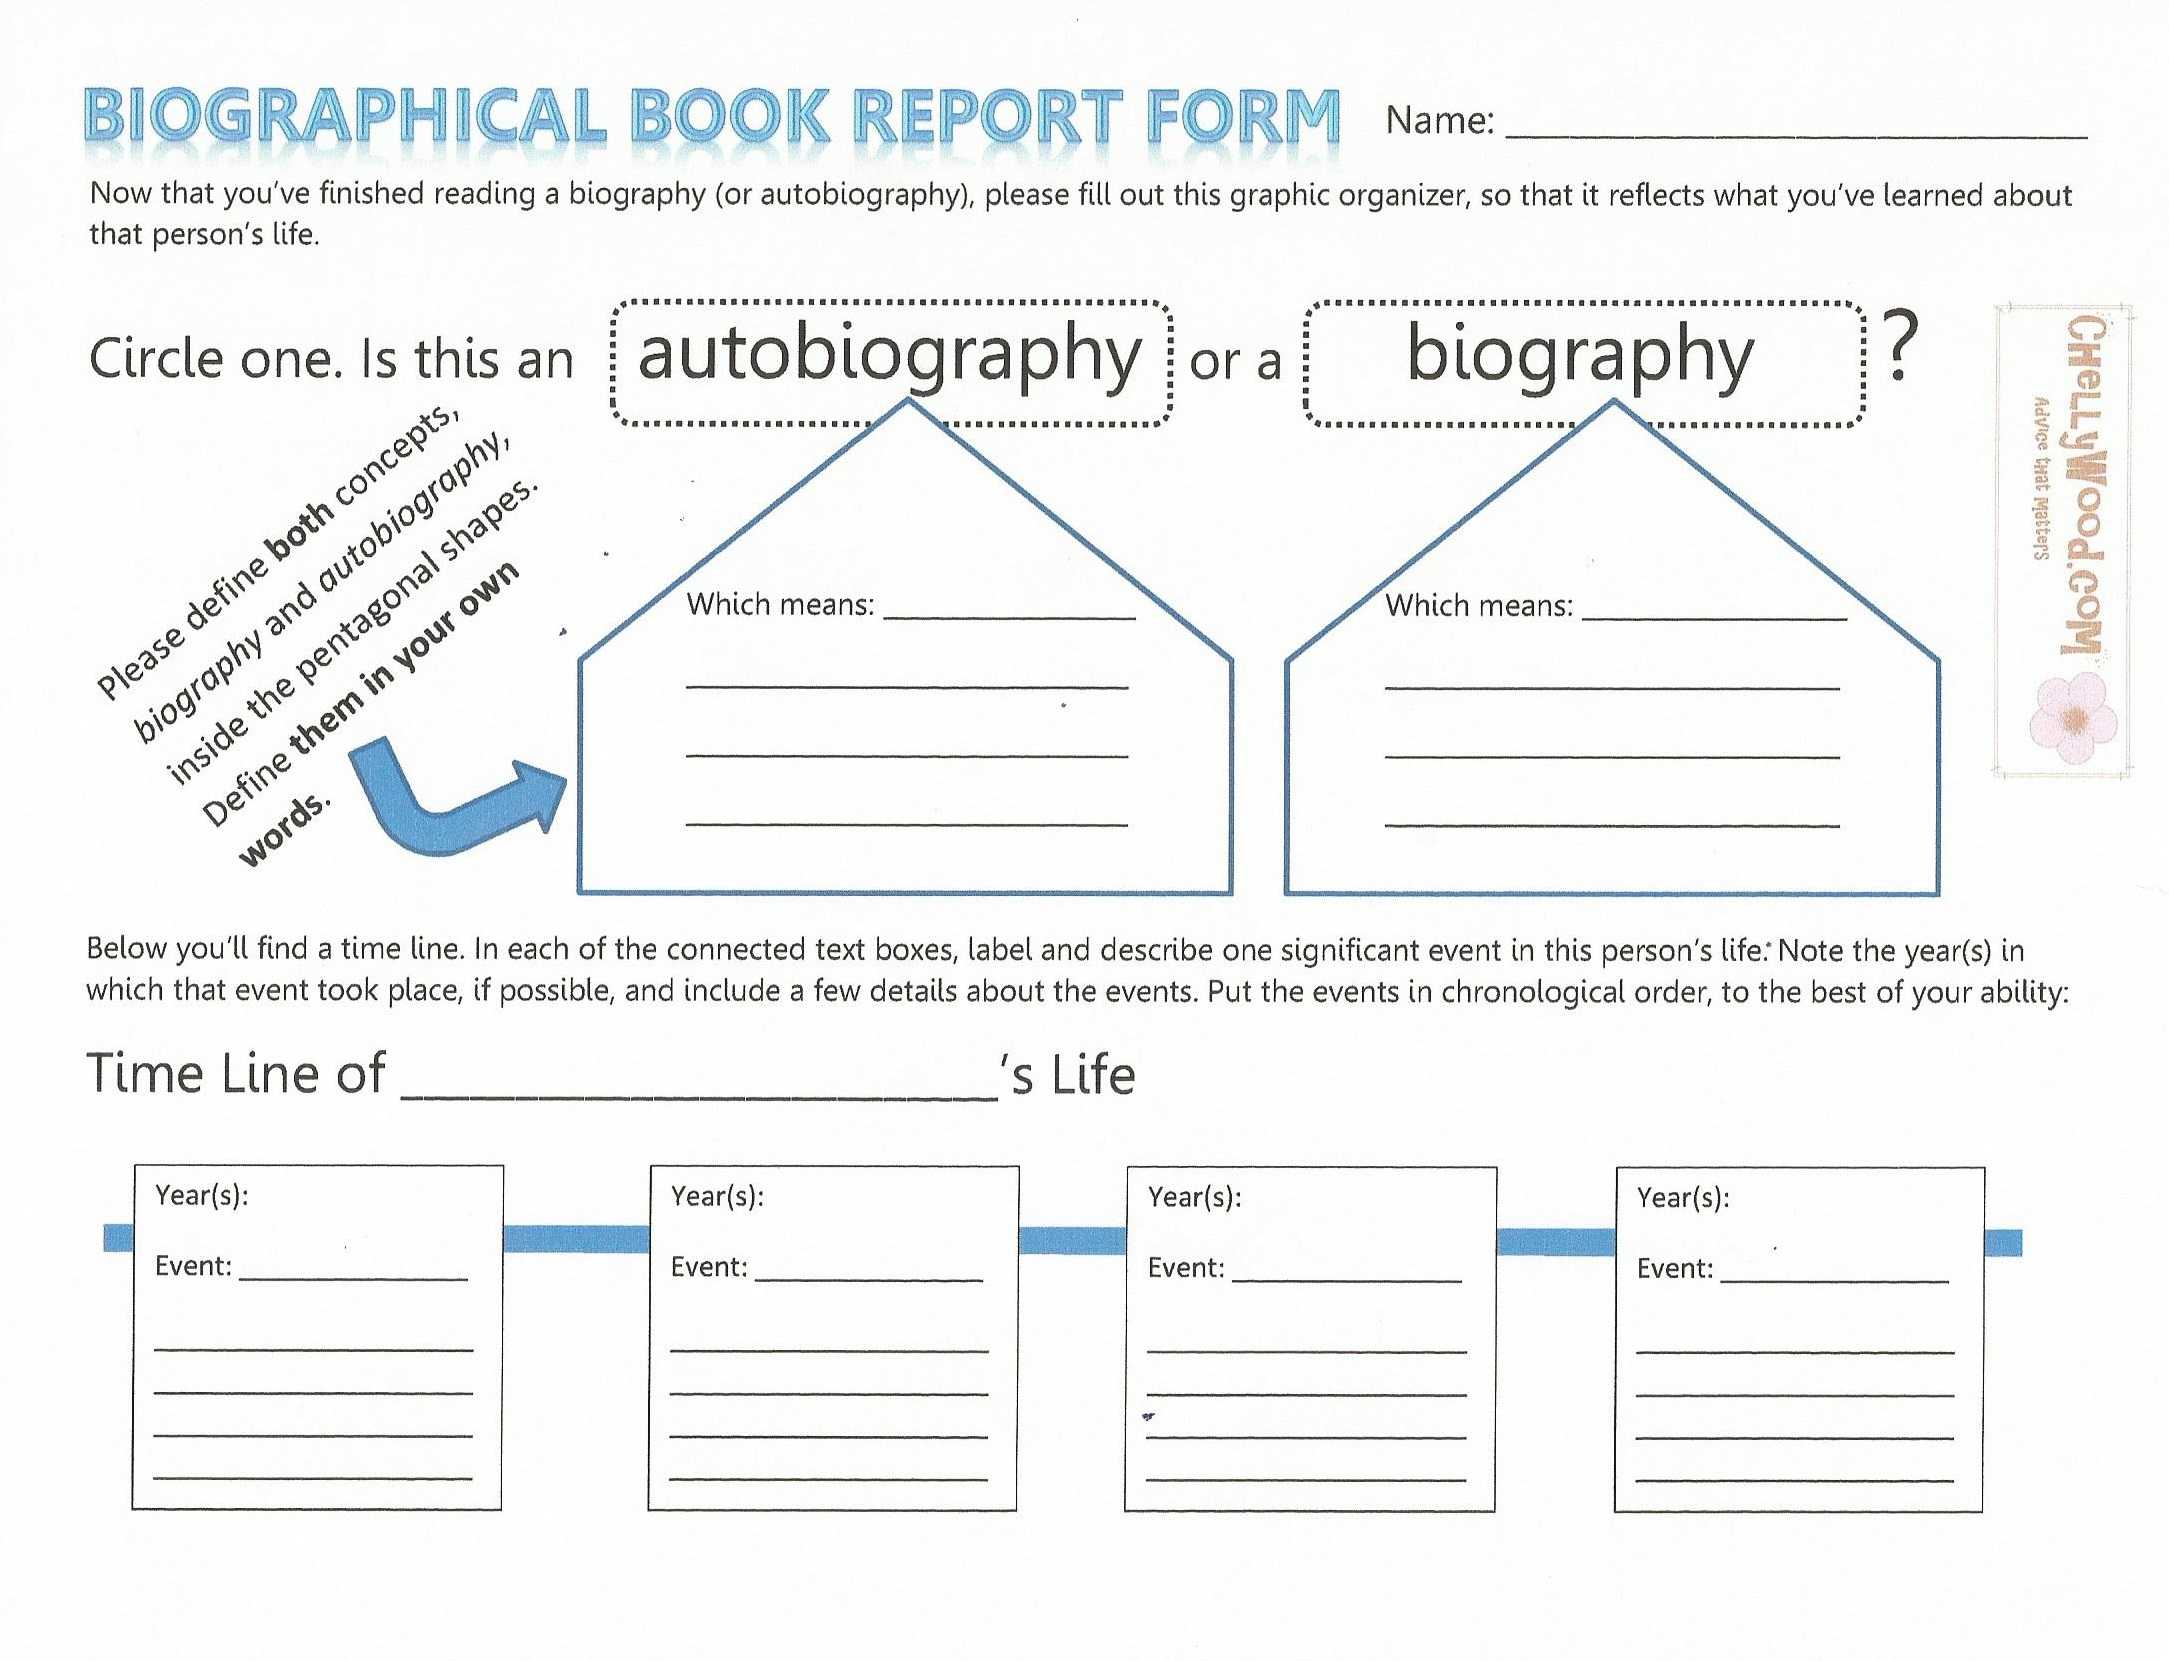 Biographical Book Report Form For Teaching Nonfiction Using With Regard To Biography Book Report Template